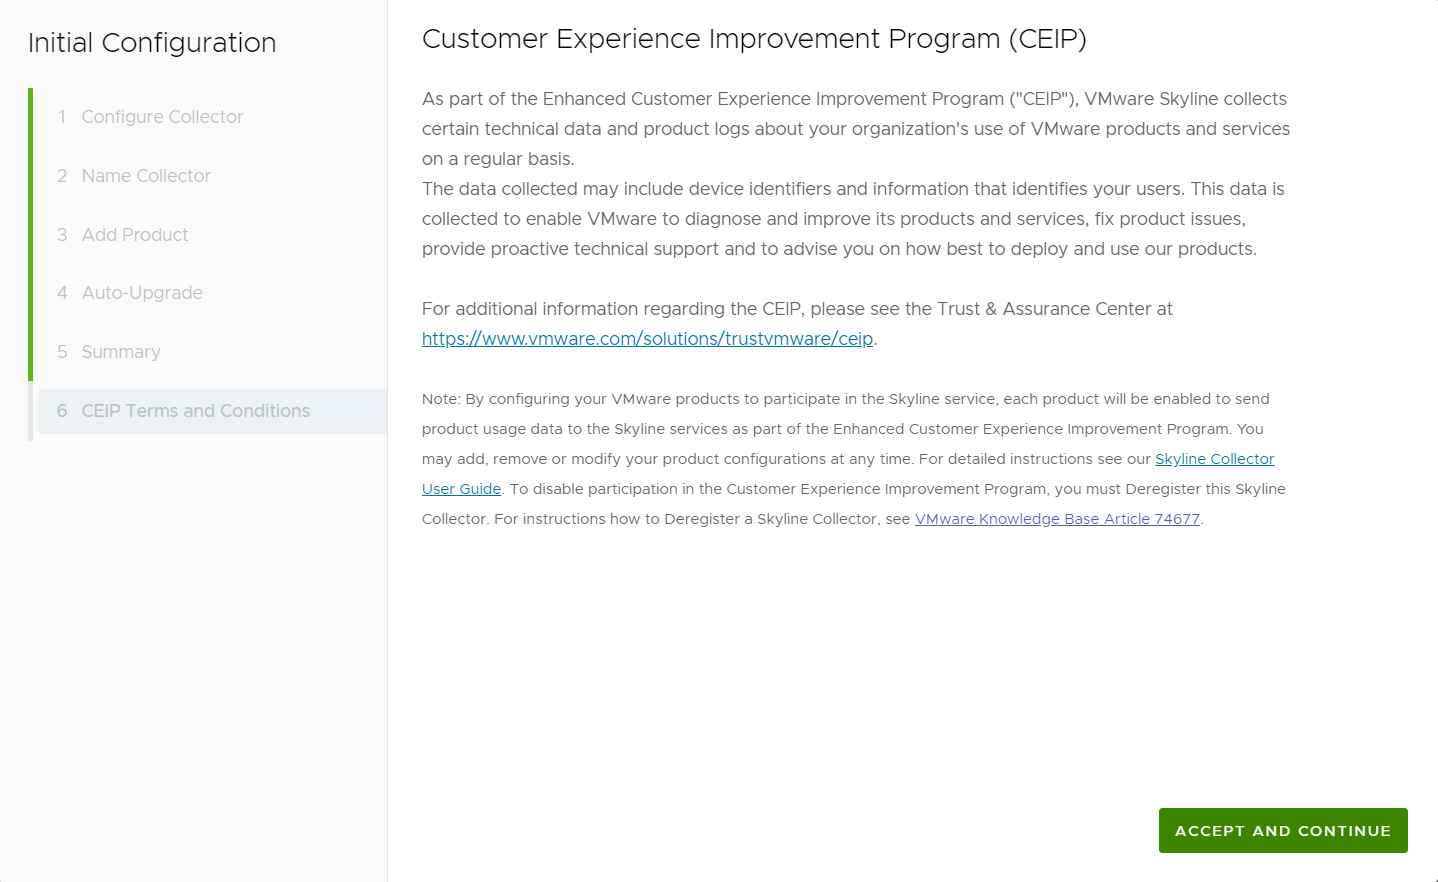 The Customer Expereince Improvement Programme (CEIP) page is displayed with the ACCEPT AND CONTINUE button in the bottom.